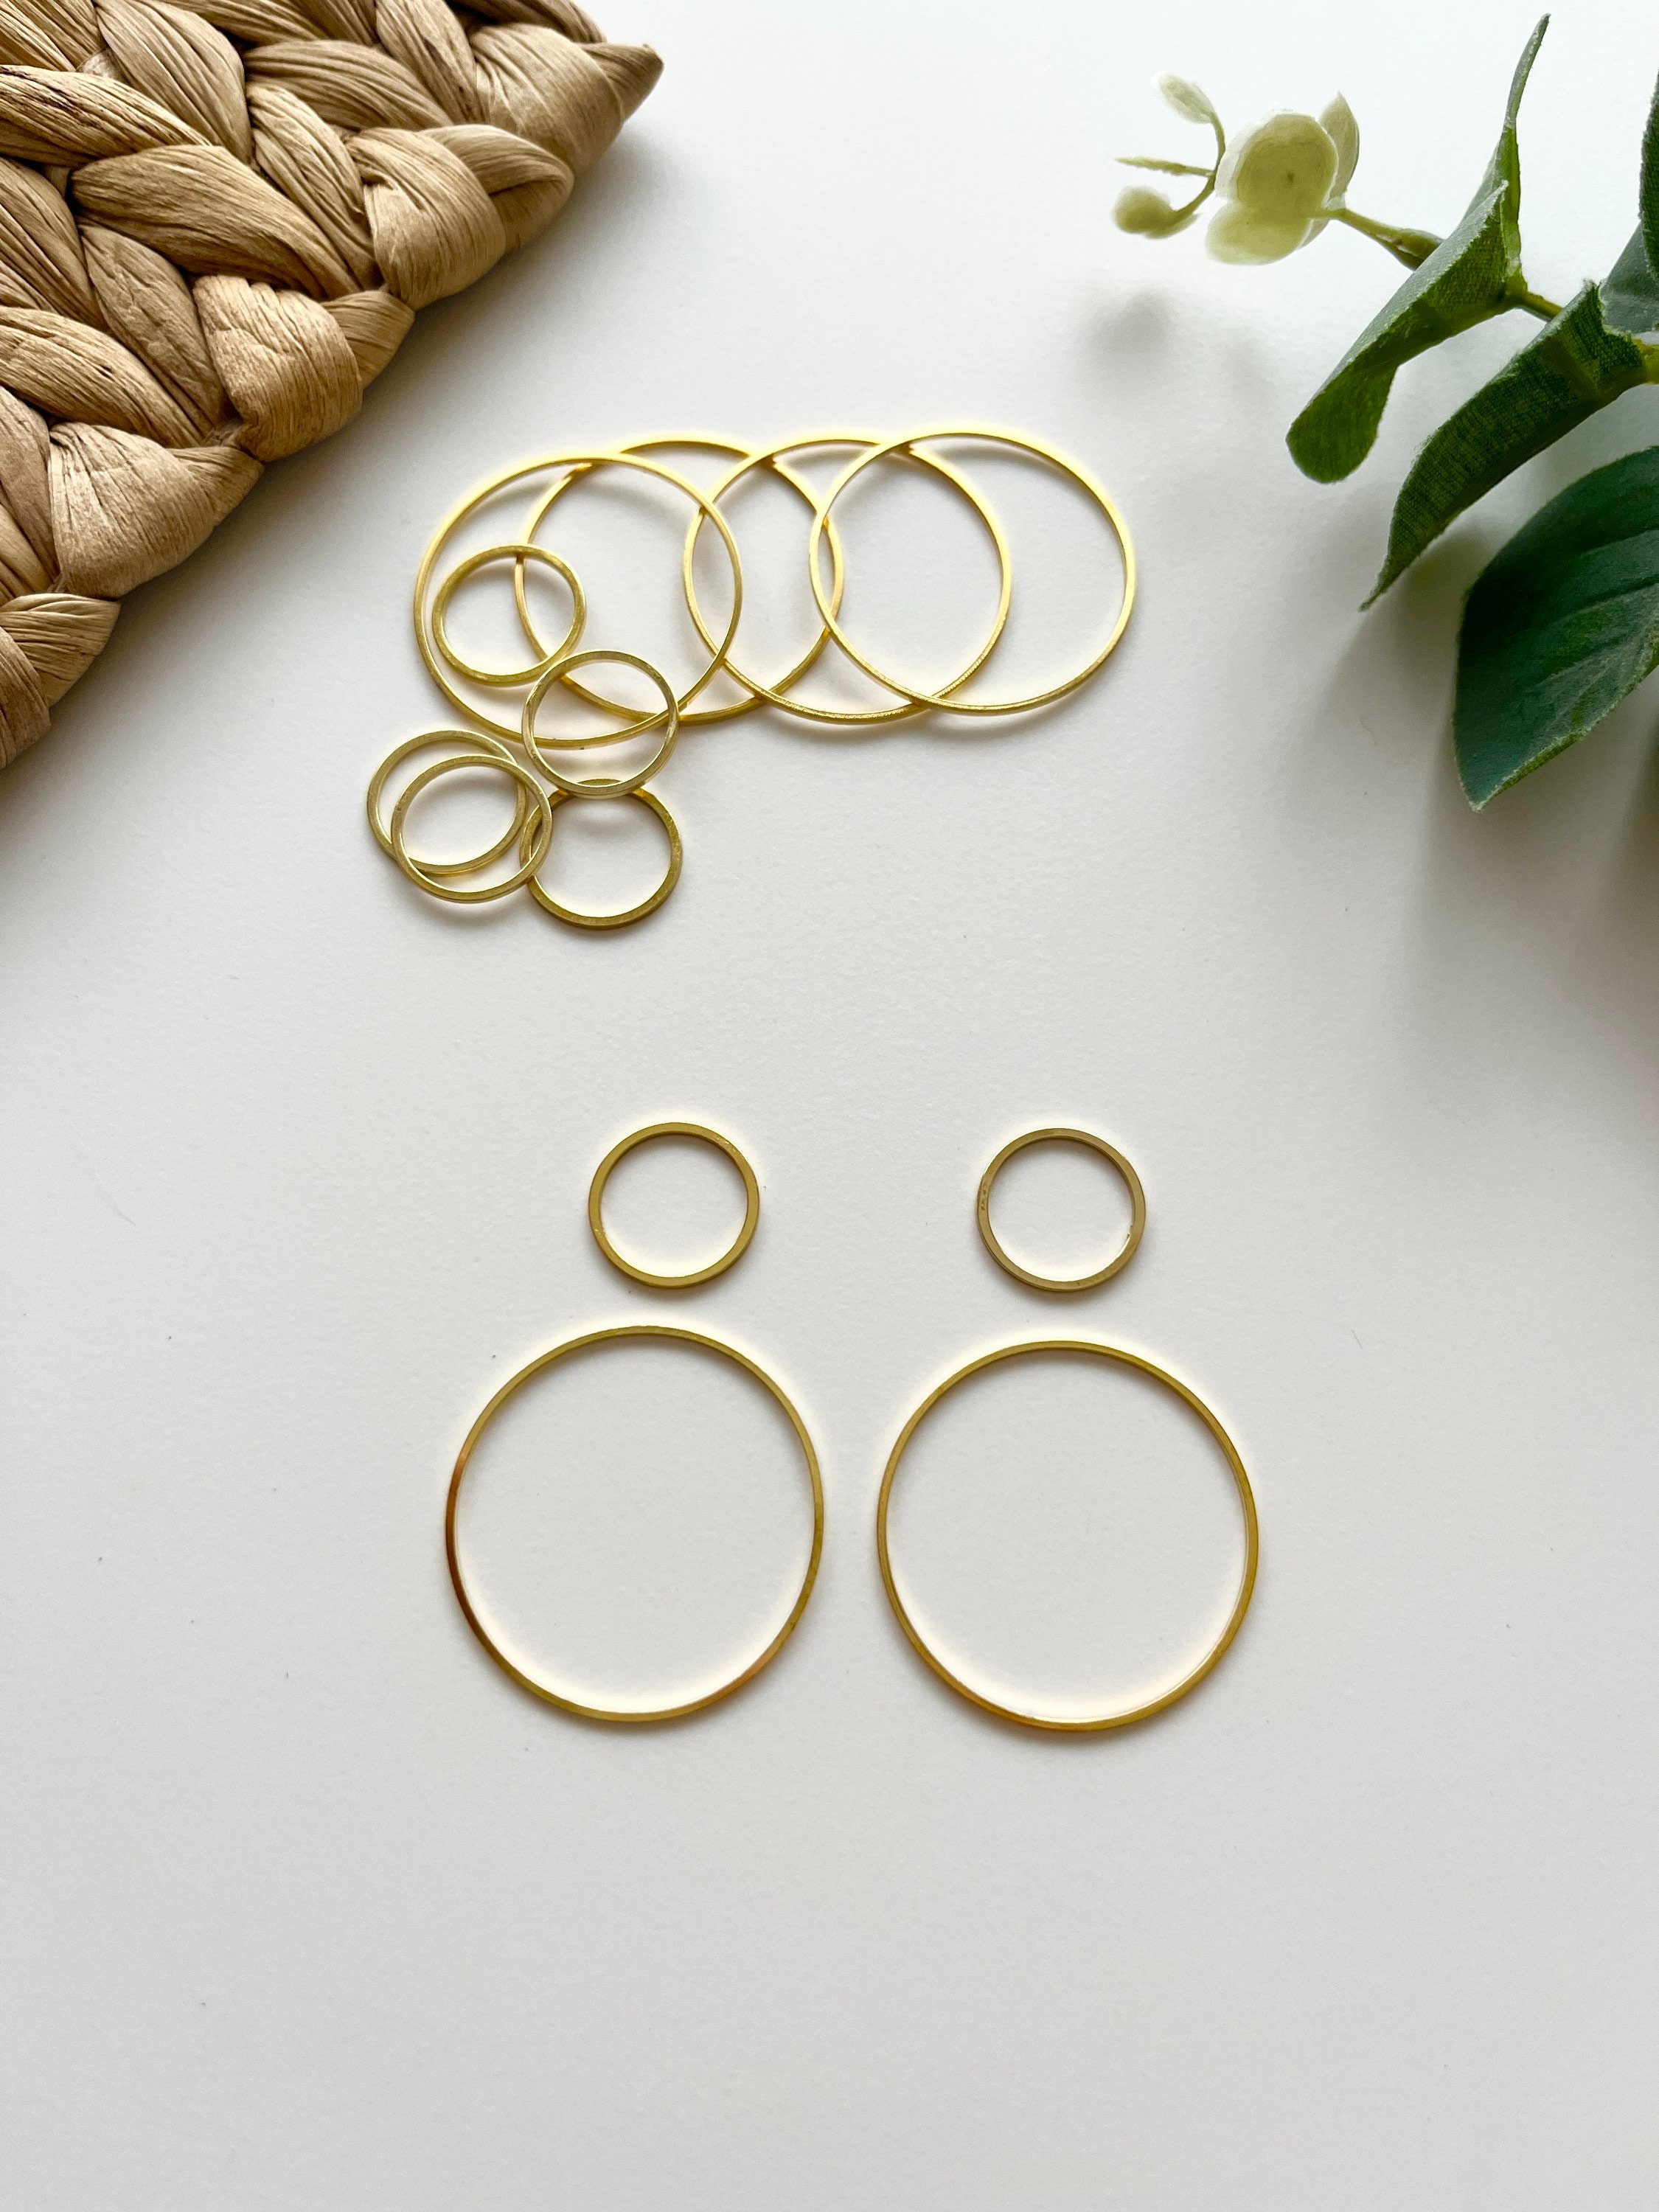 Closed Circle Component 30mm & 15mm | 2 Pcs/ Polymer Clay/ Jewellery/ Jewellery Findings/Clay Tools Brass Charm Raw